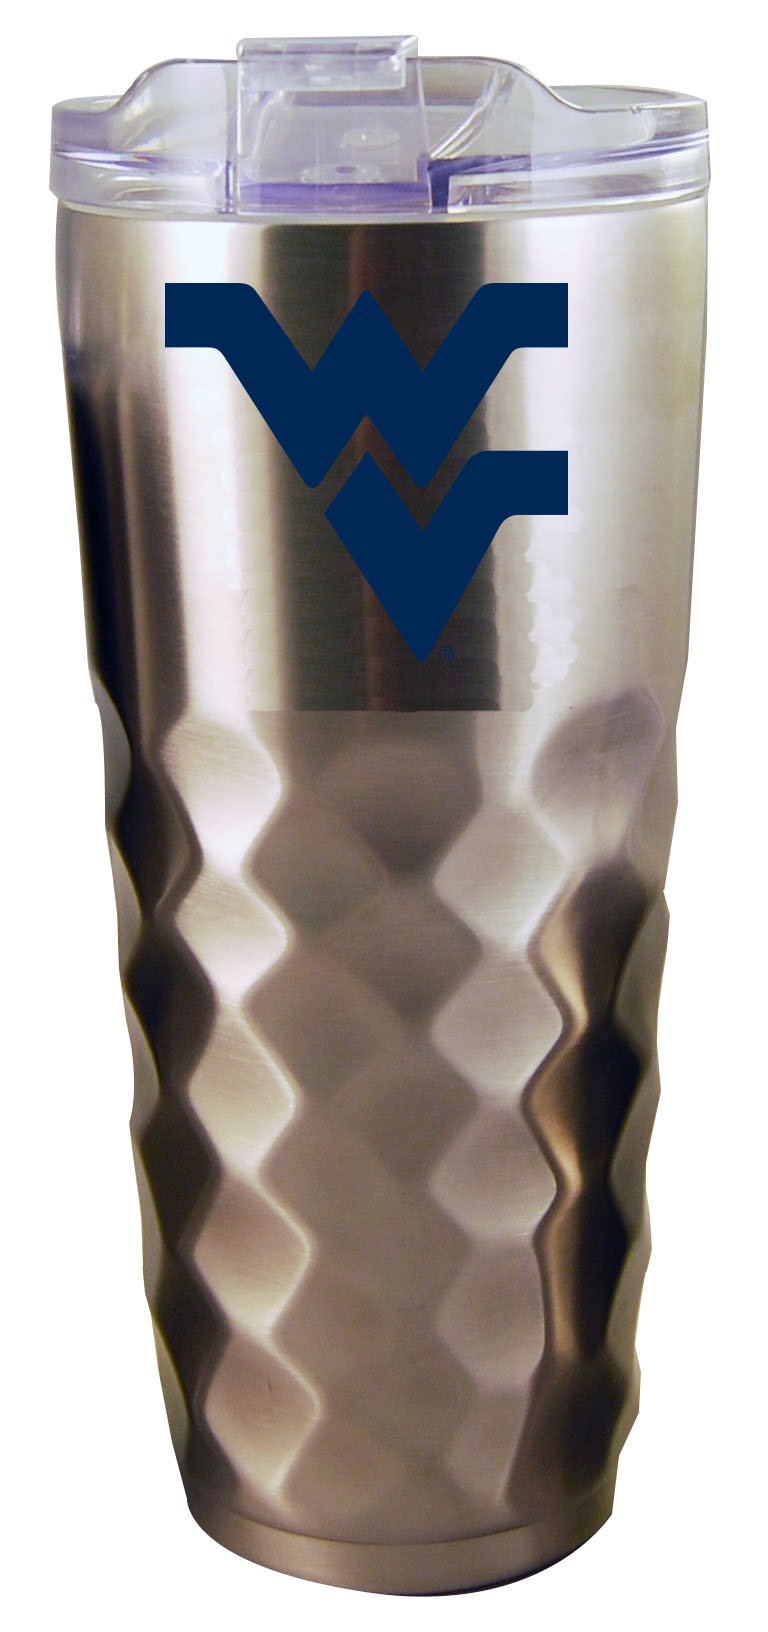 32OZ SS DIAMD TMBLR  WEST VA
COL, CurrentProduct, Drinkware_category_All, West Virginia Mountaineers, WVI
The Memory Company